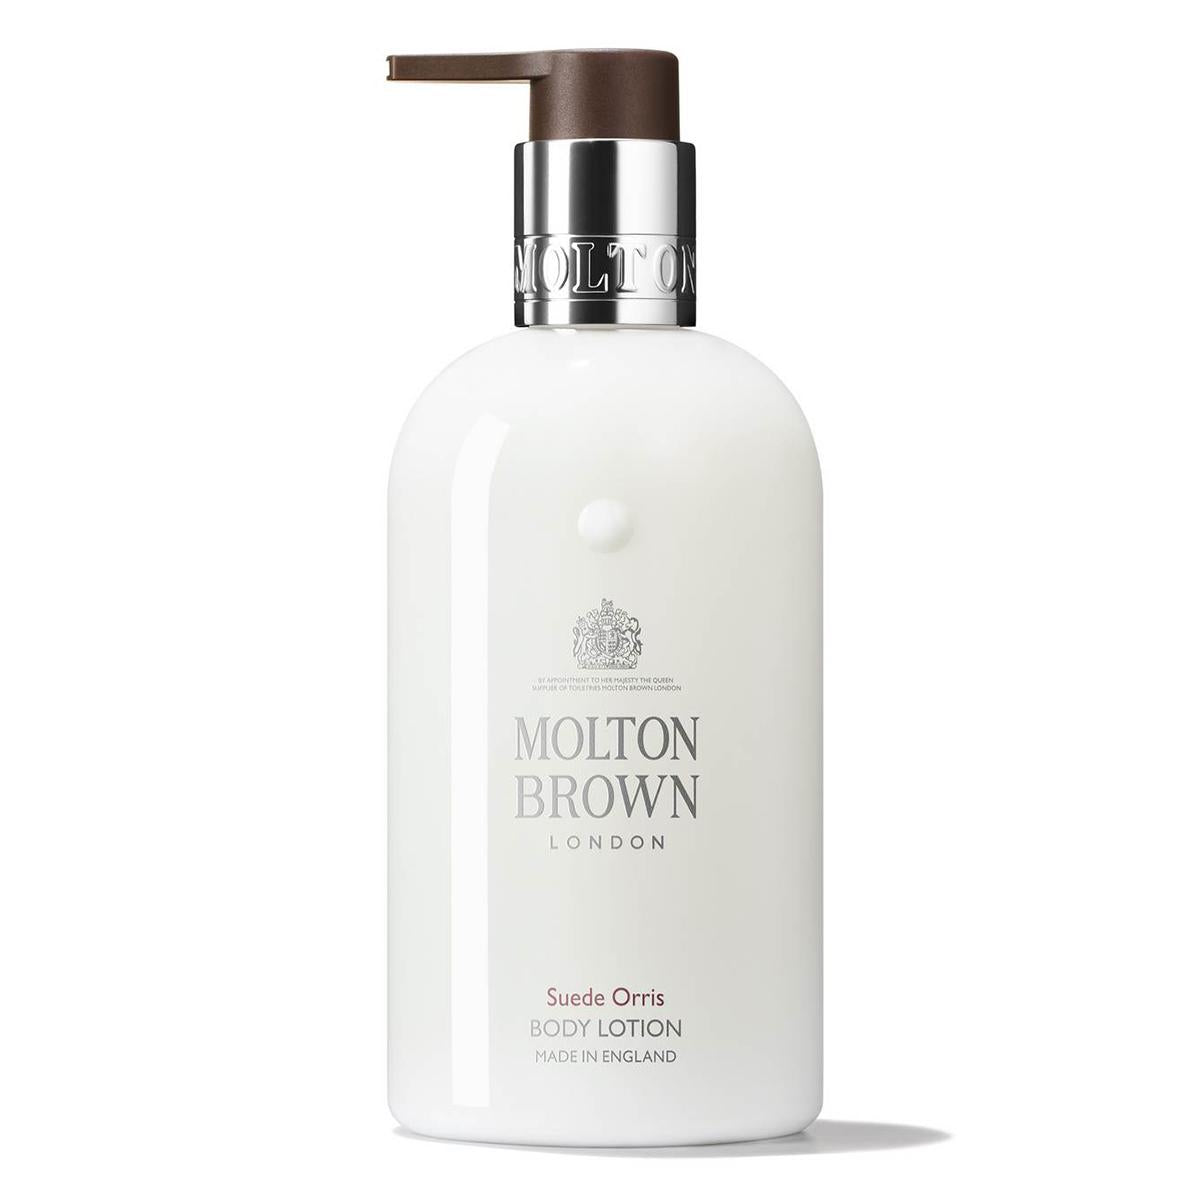 Primary image of Body Lotion- Suede Orris